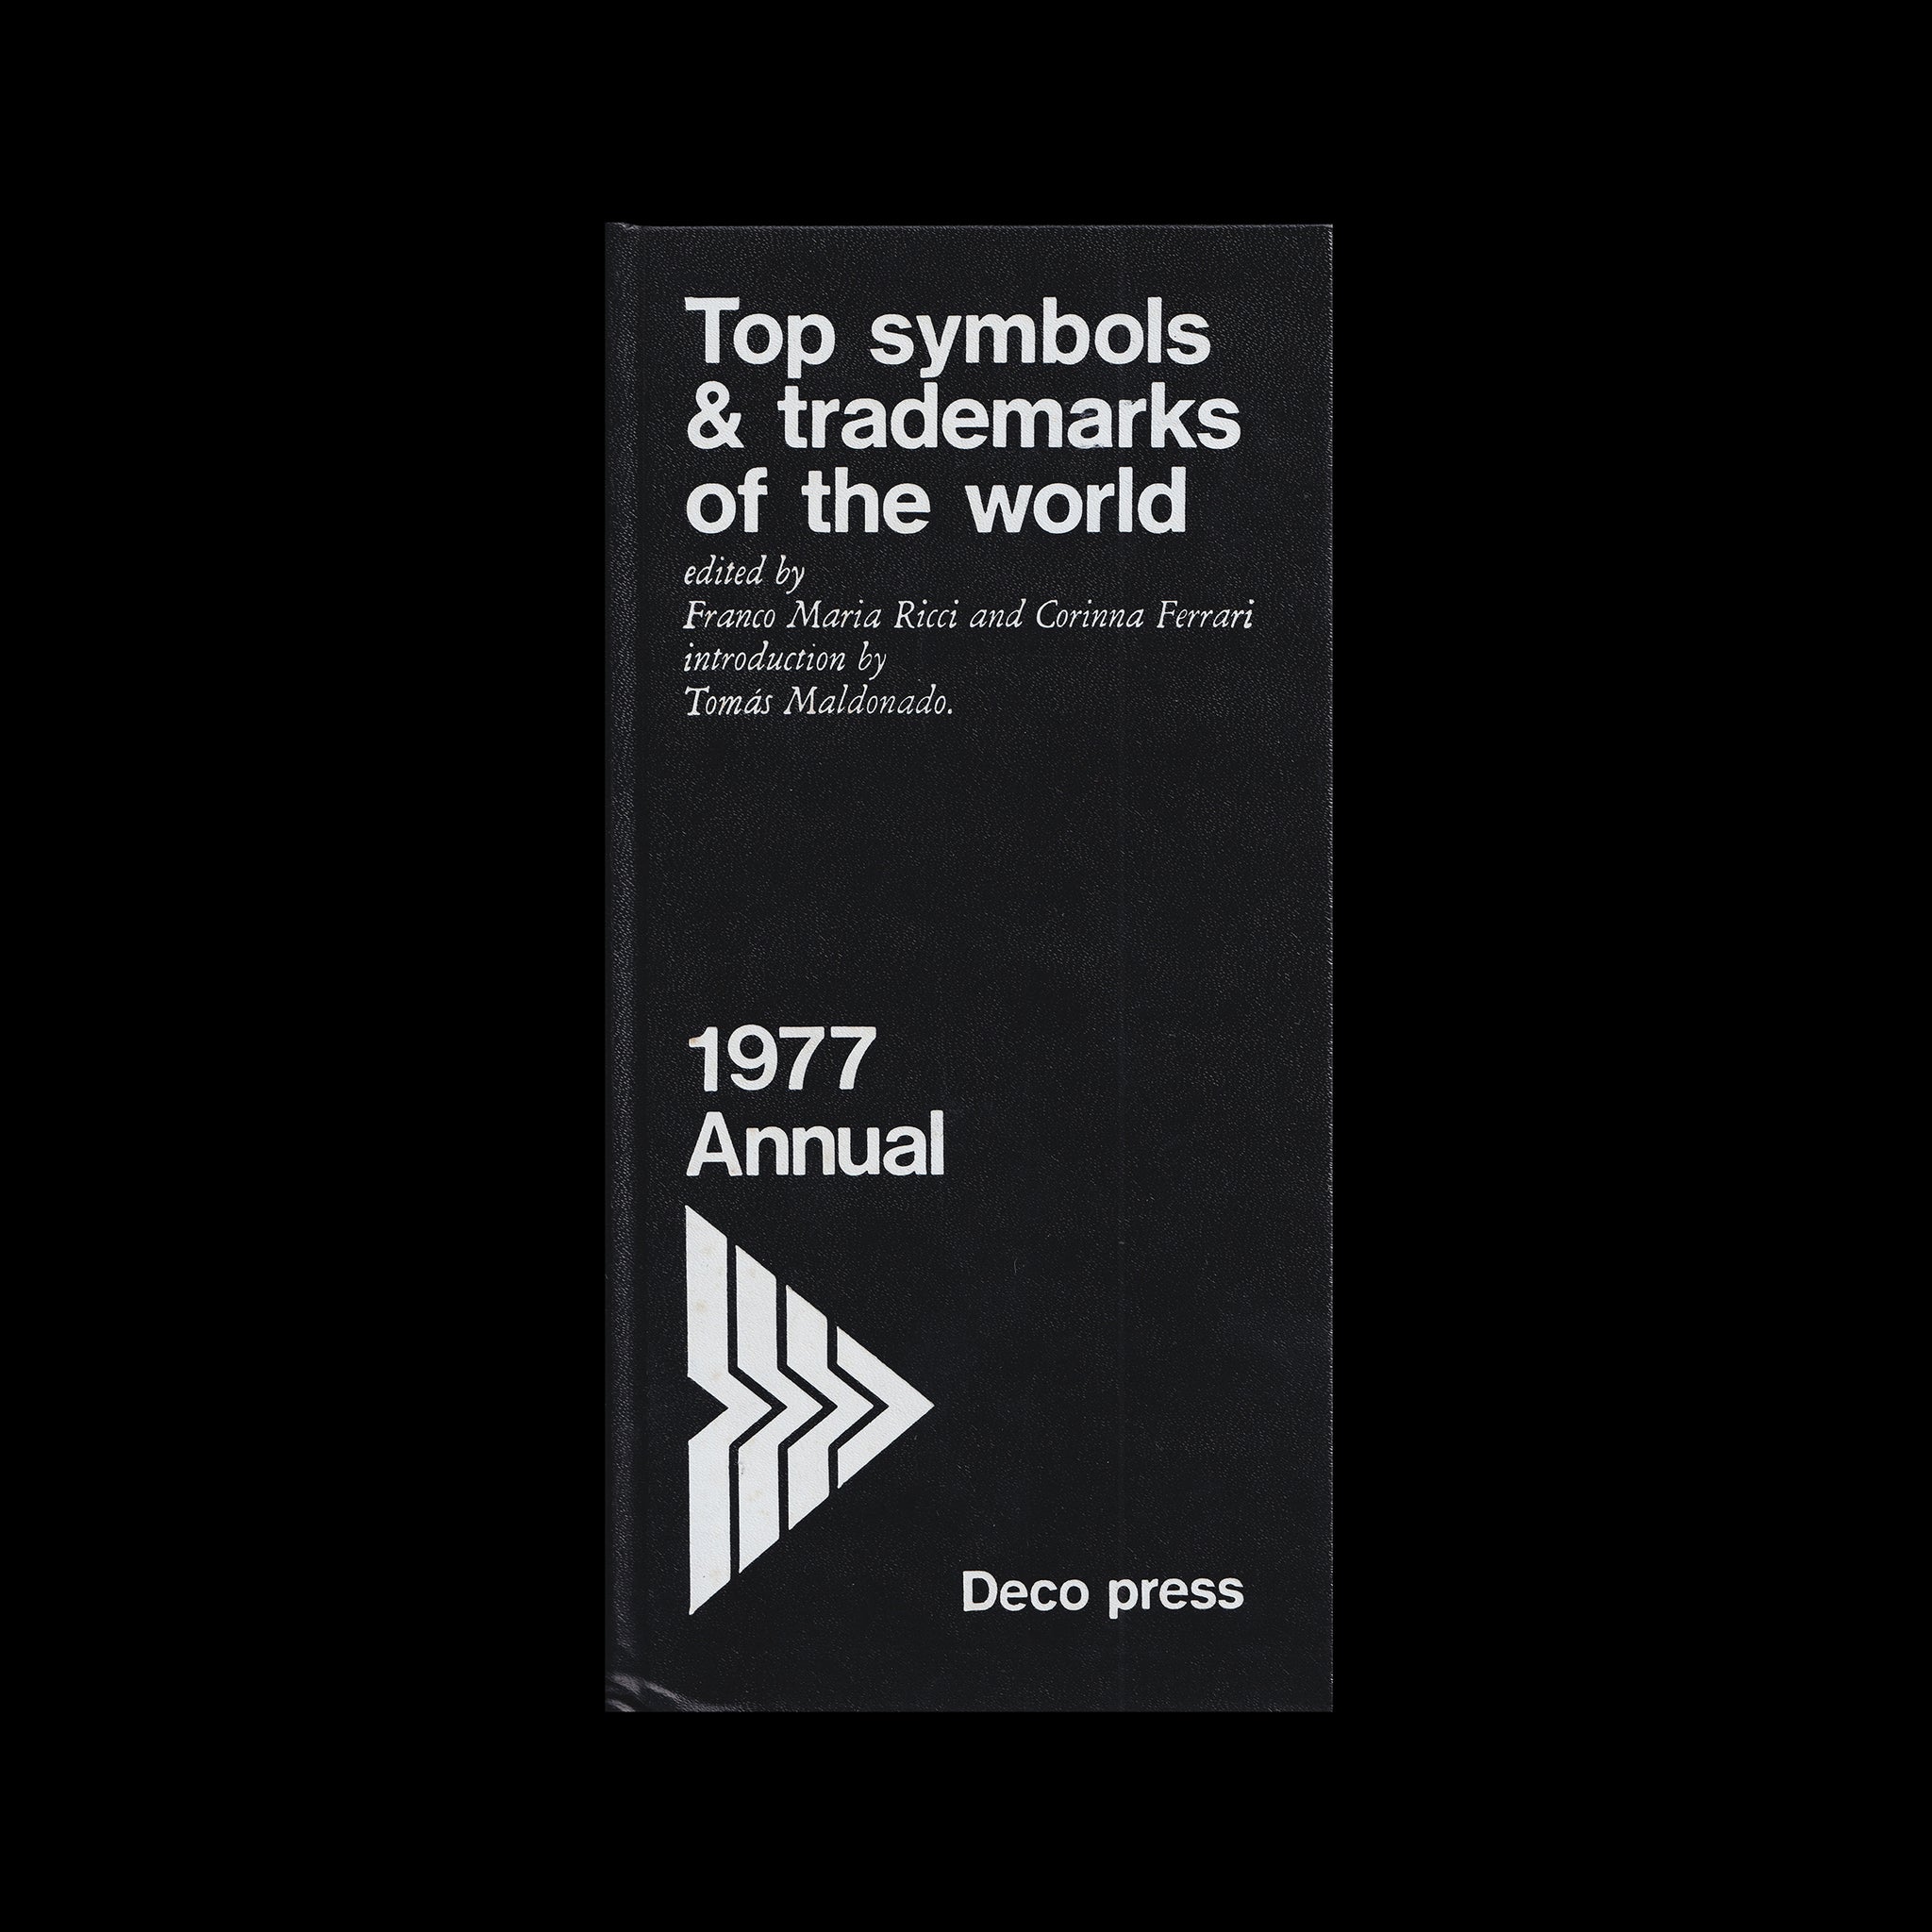 Top Symbols & Trademarks of the World, Volume 8, 1977 Annual